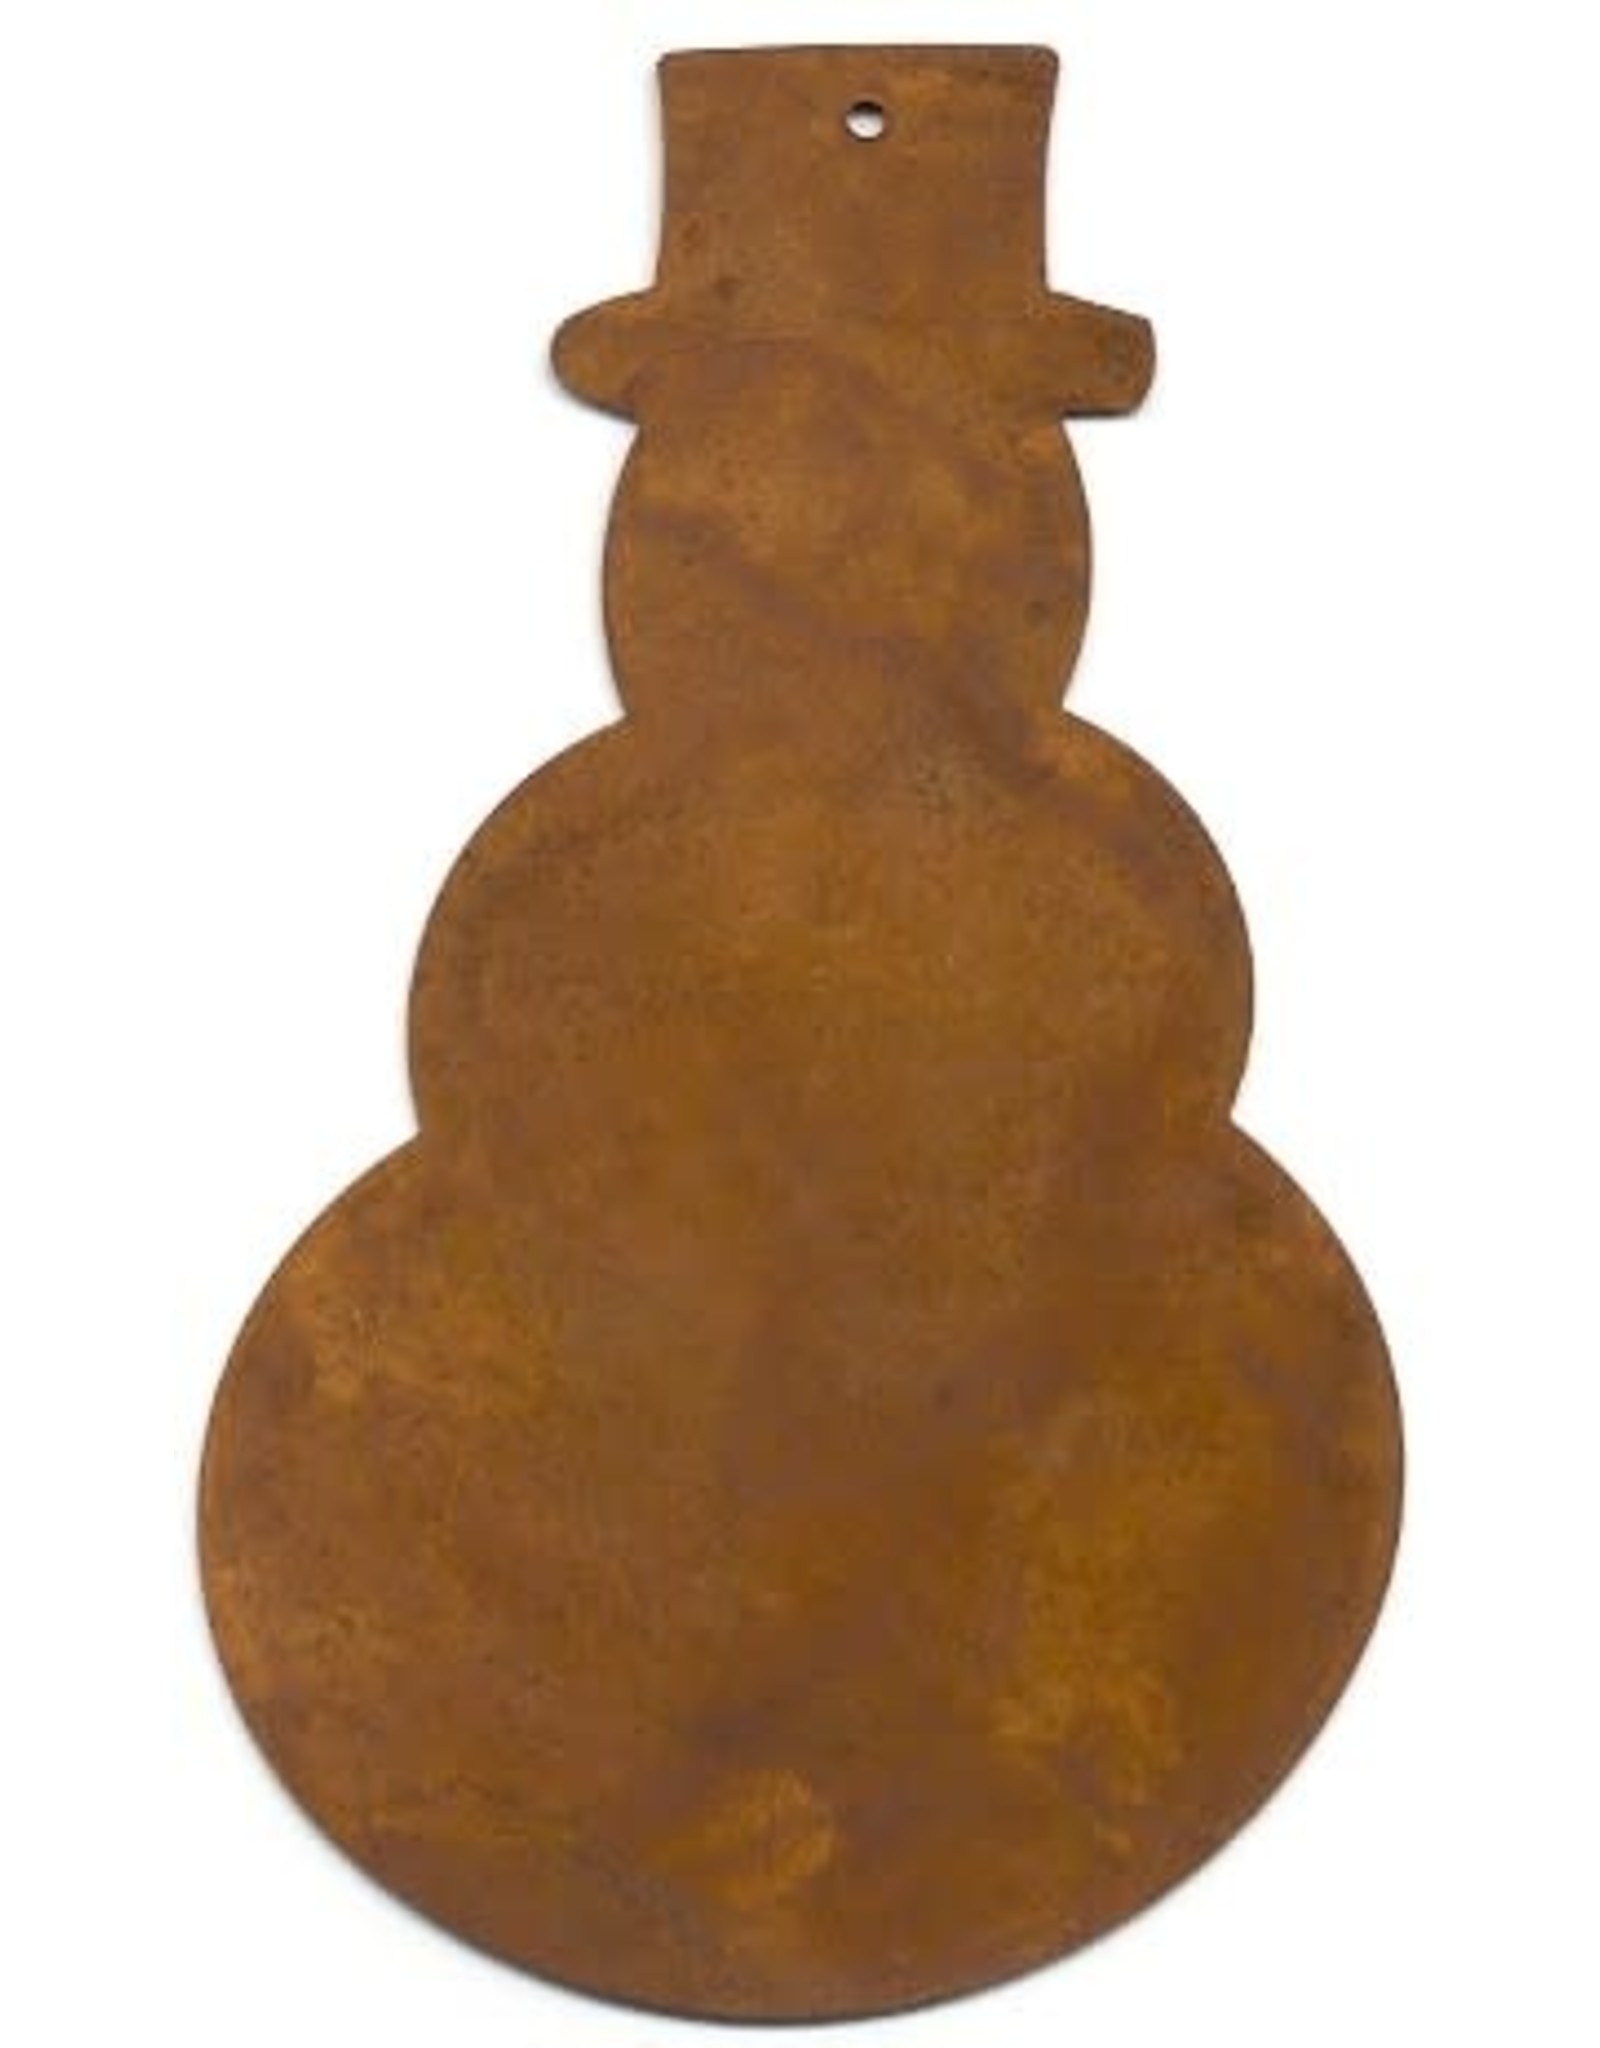 RUSTY TIN SNOWMAN 4 1/2"  (WITH  HOLE) PACKAGED 12